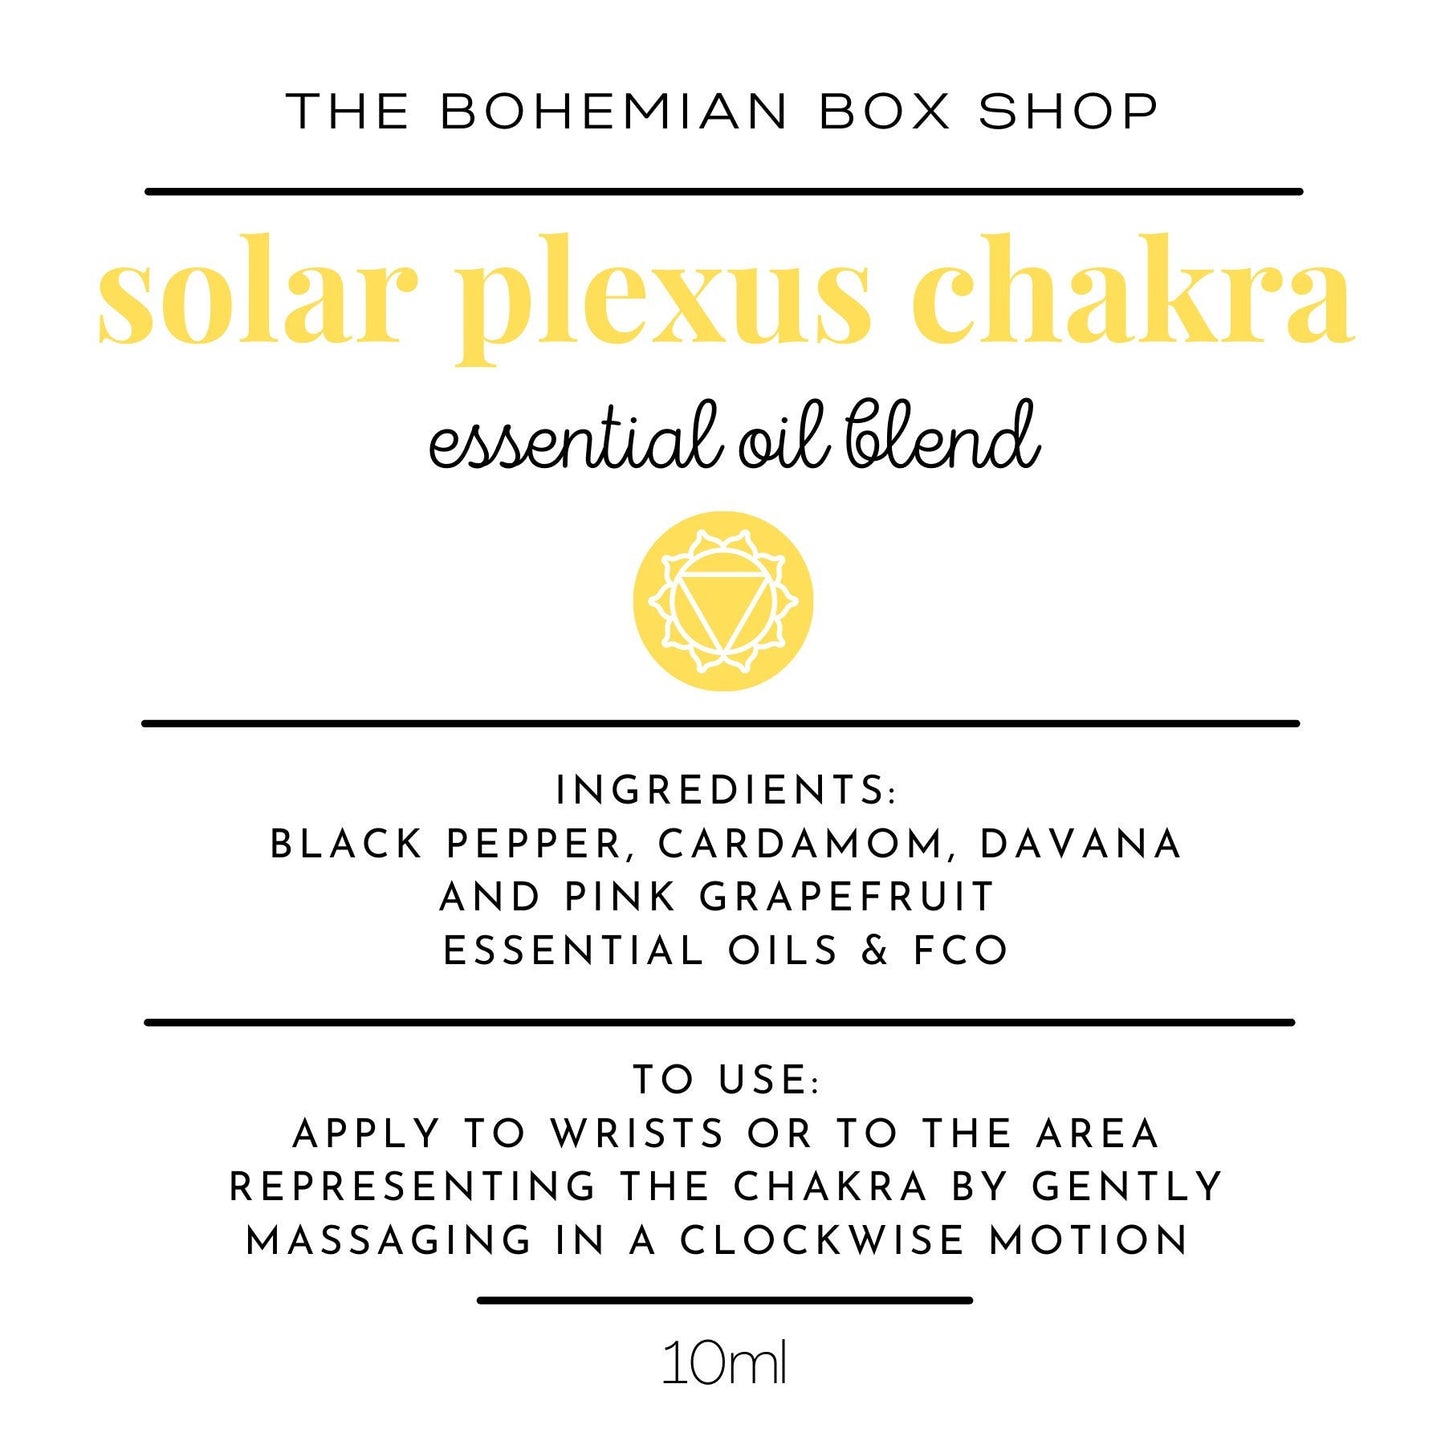 Solar plexus chakra essential oil blend ingredients and directions for use 